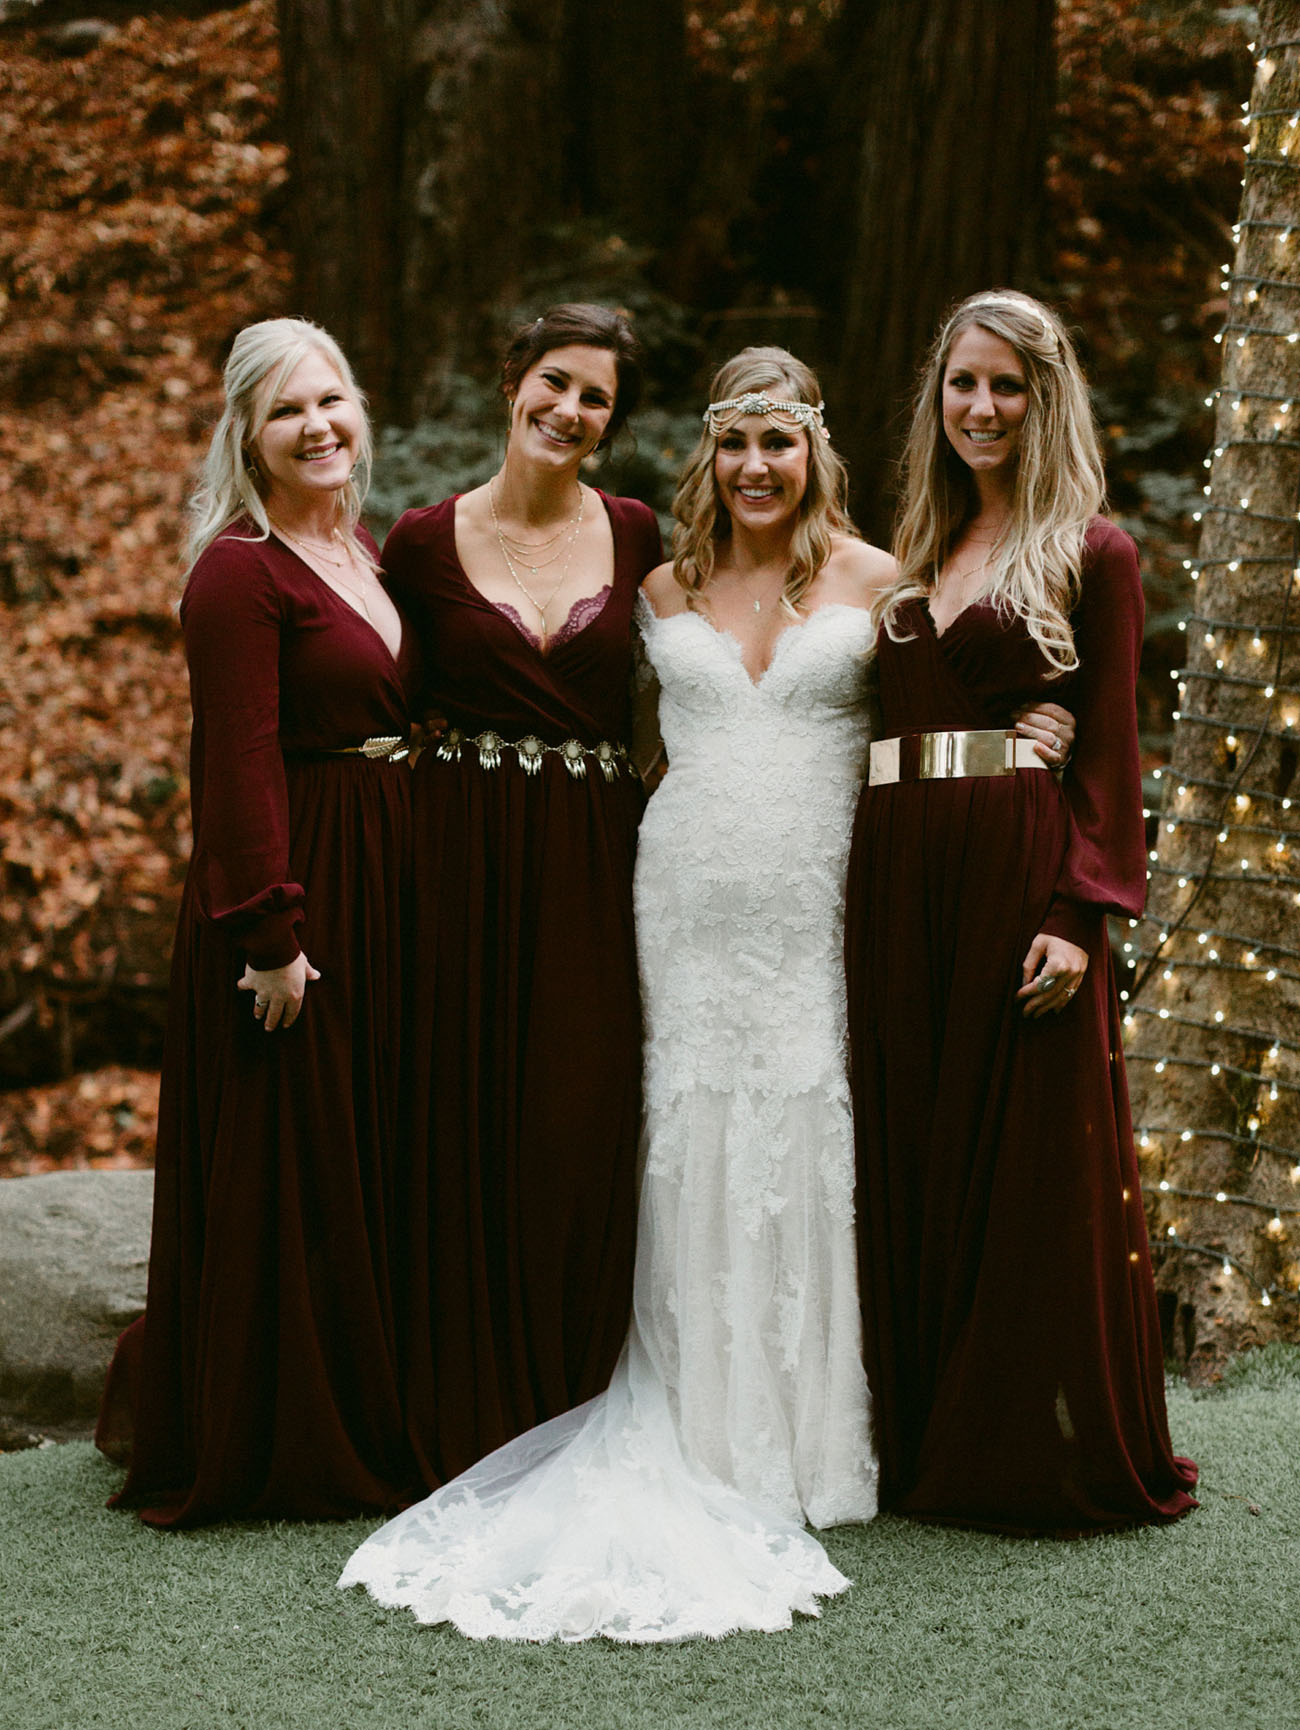 The bride was wearing a strapless lace dress with a train, and the bridesmaids rocked burgundy dresses with different belts